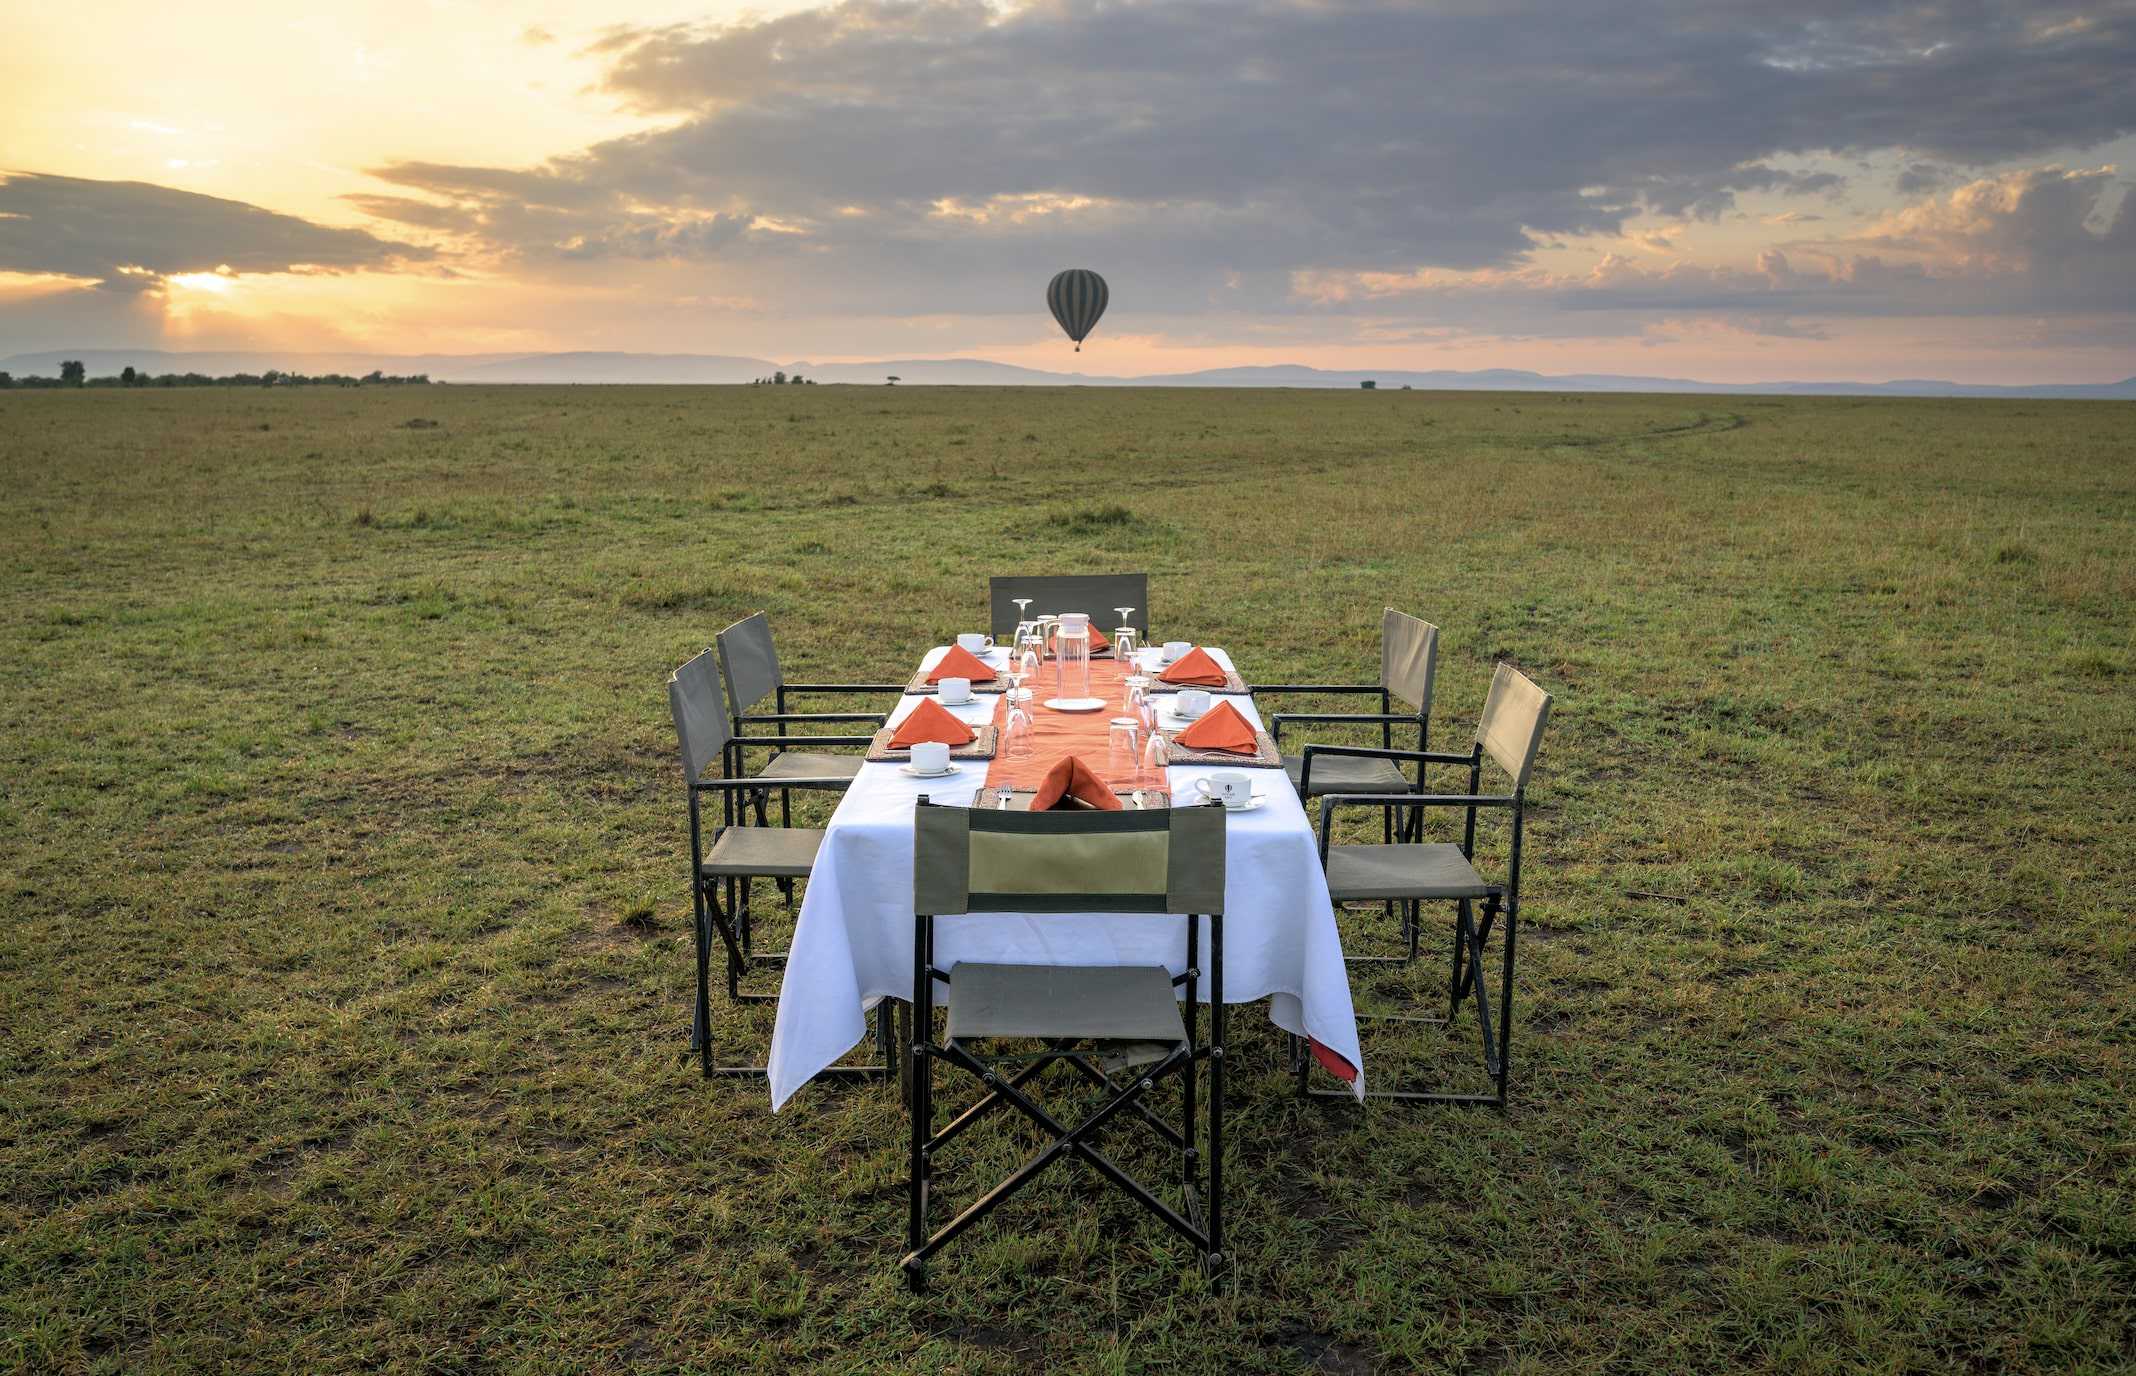 Hot air ballooning in Maasai Mara National Reserve is one of the most magical ways to experience Kenya’s vast savannah and wildlife.